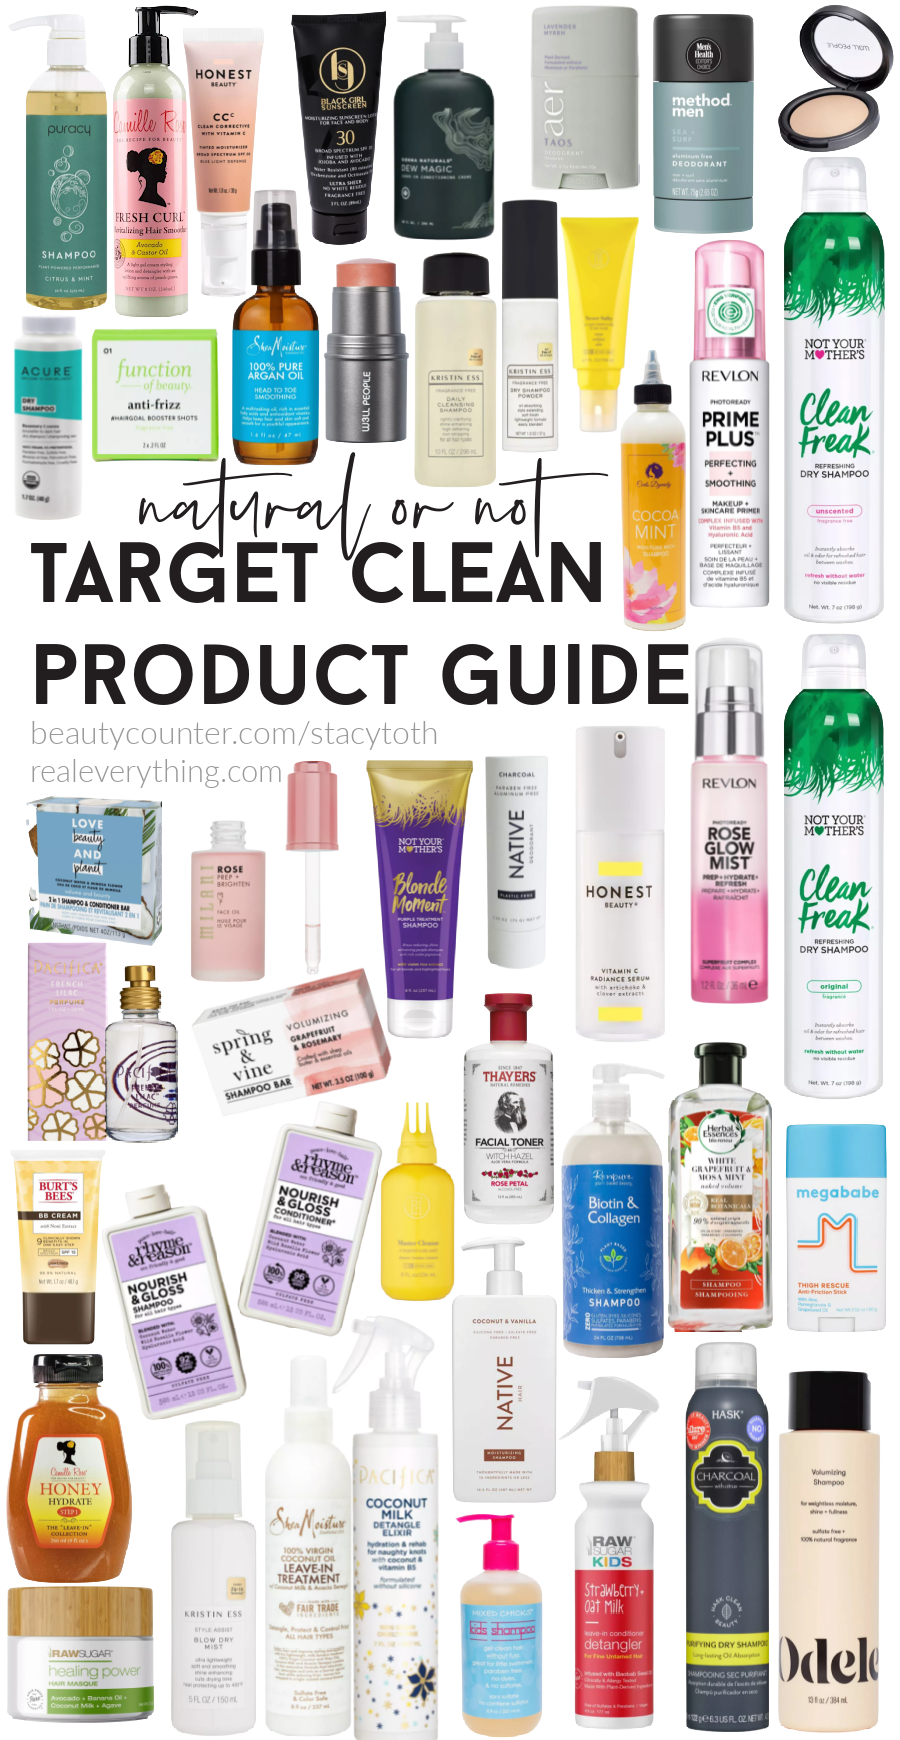 Target Clean Product Guide Overall